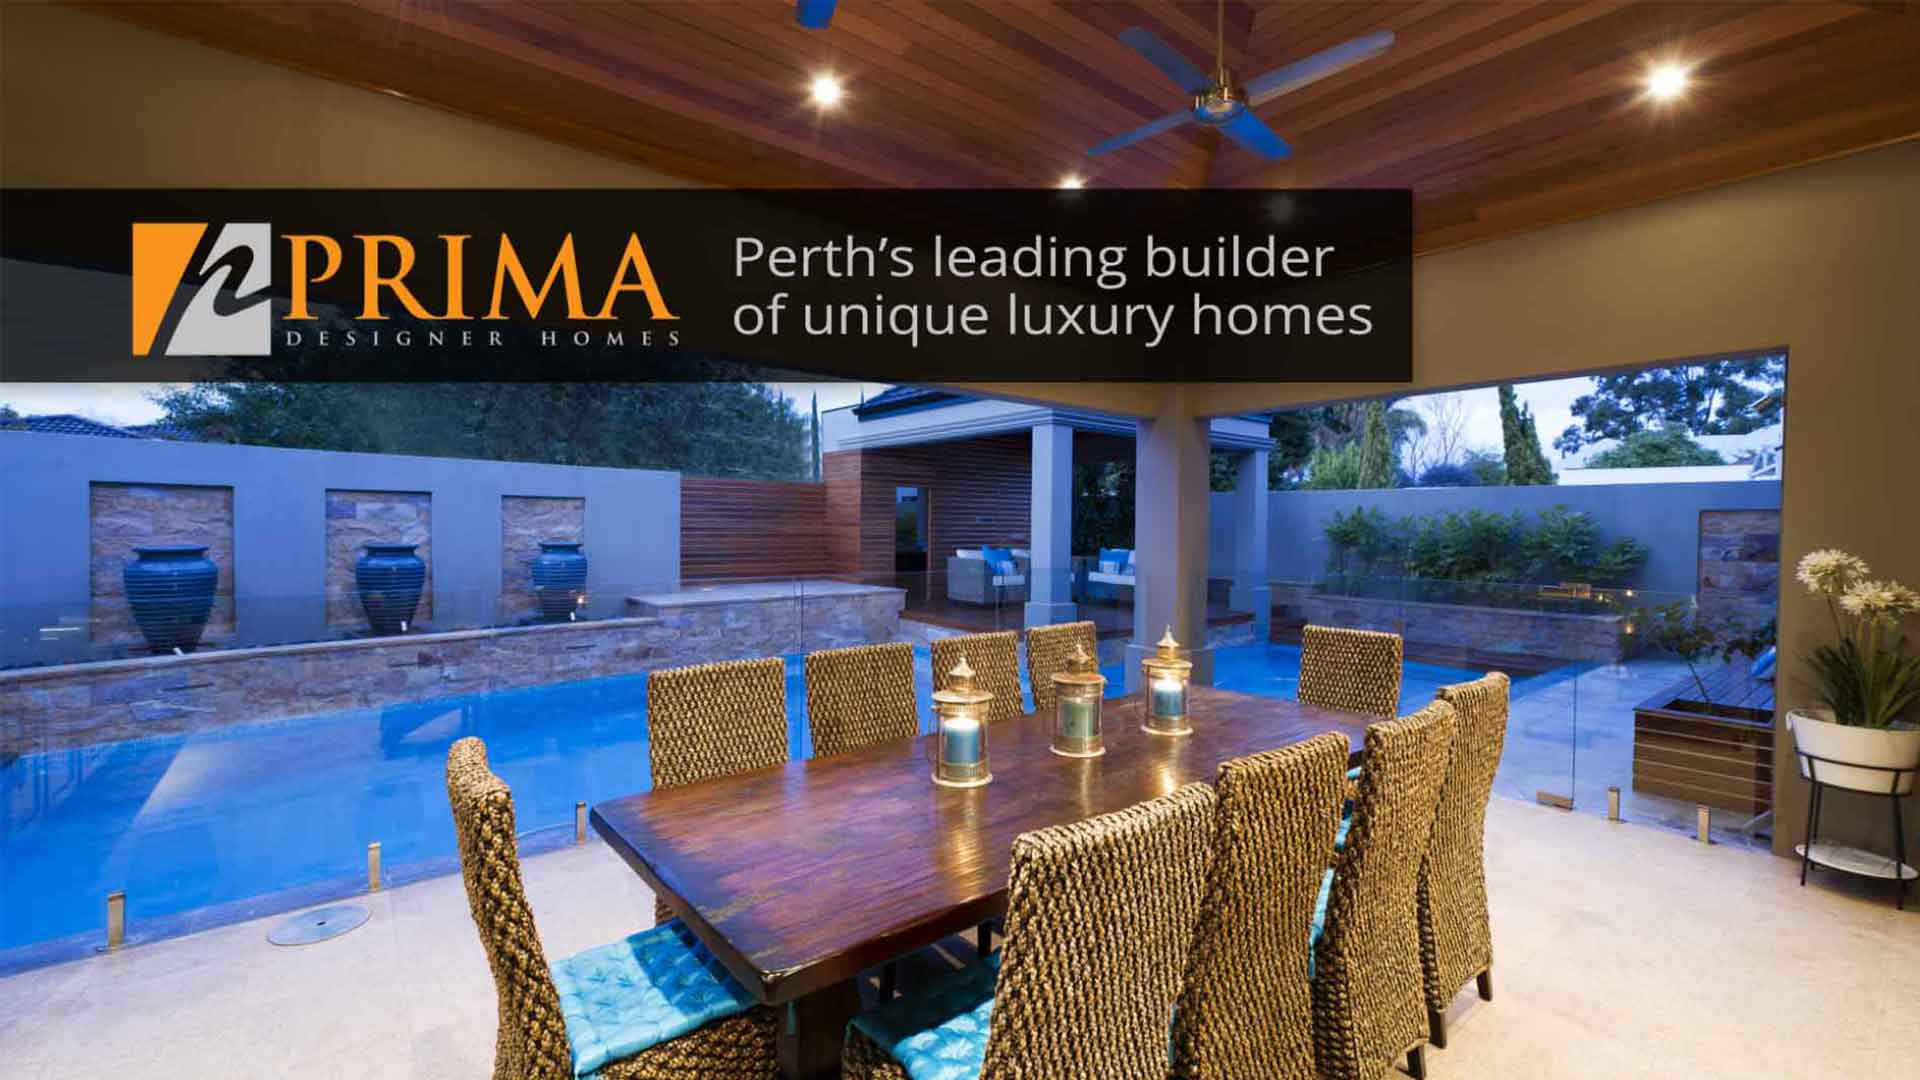 Video of Prima Cutom Home builder Video about the positive difference you experience when building with Prima Homes